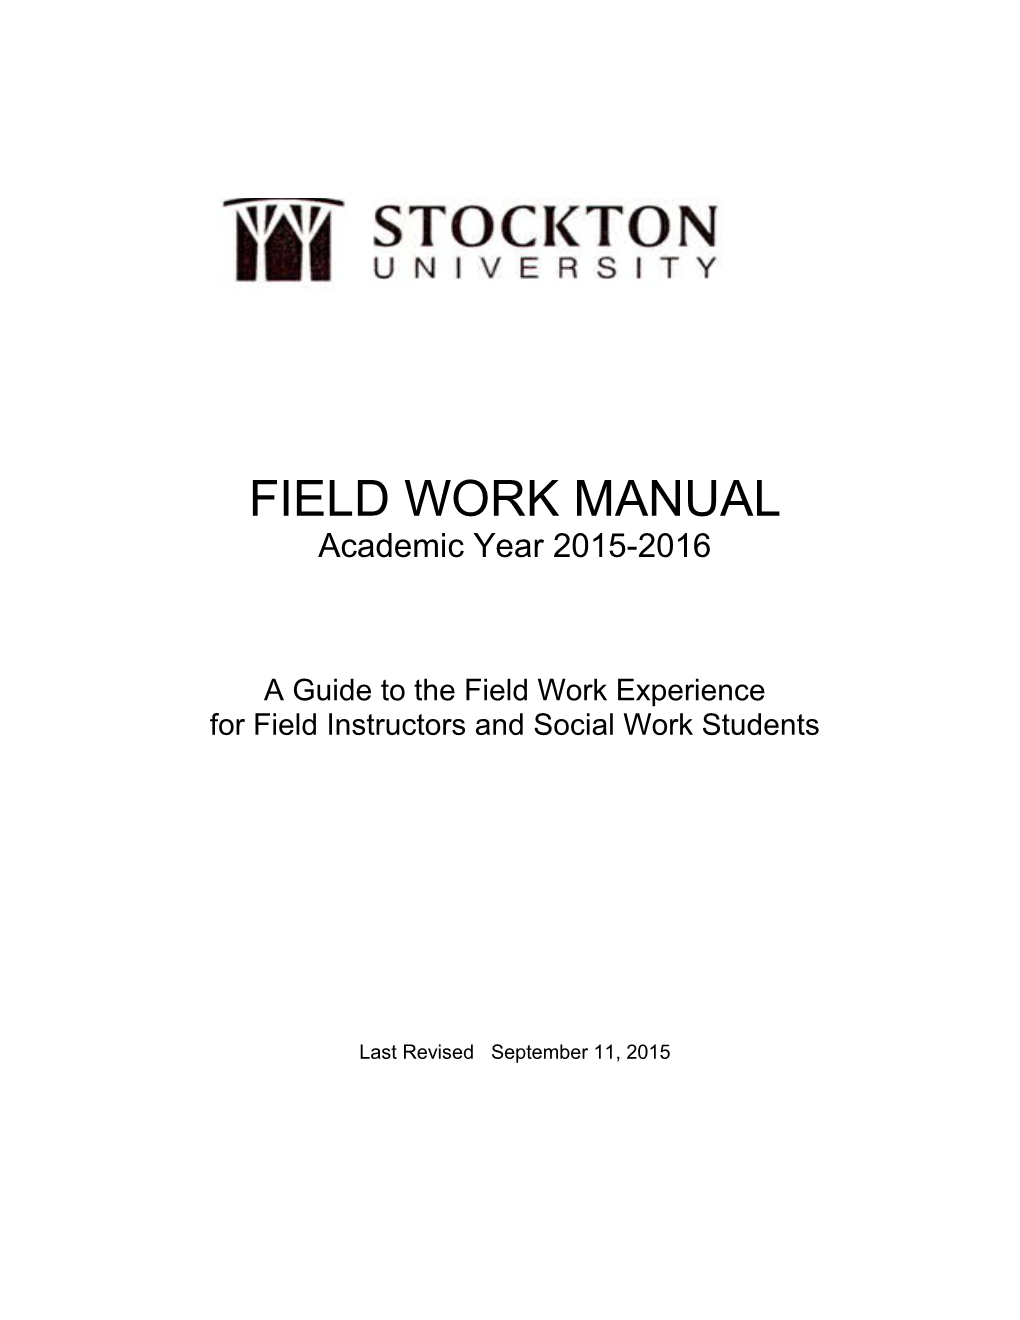 For Field Instructors and Social Work Students